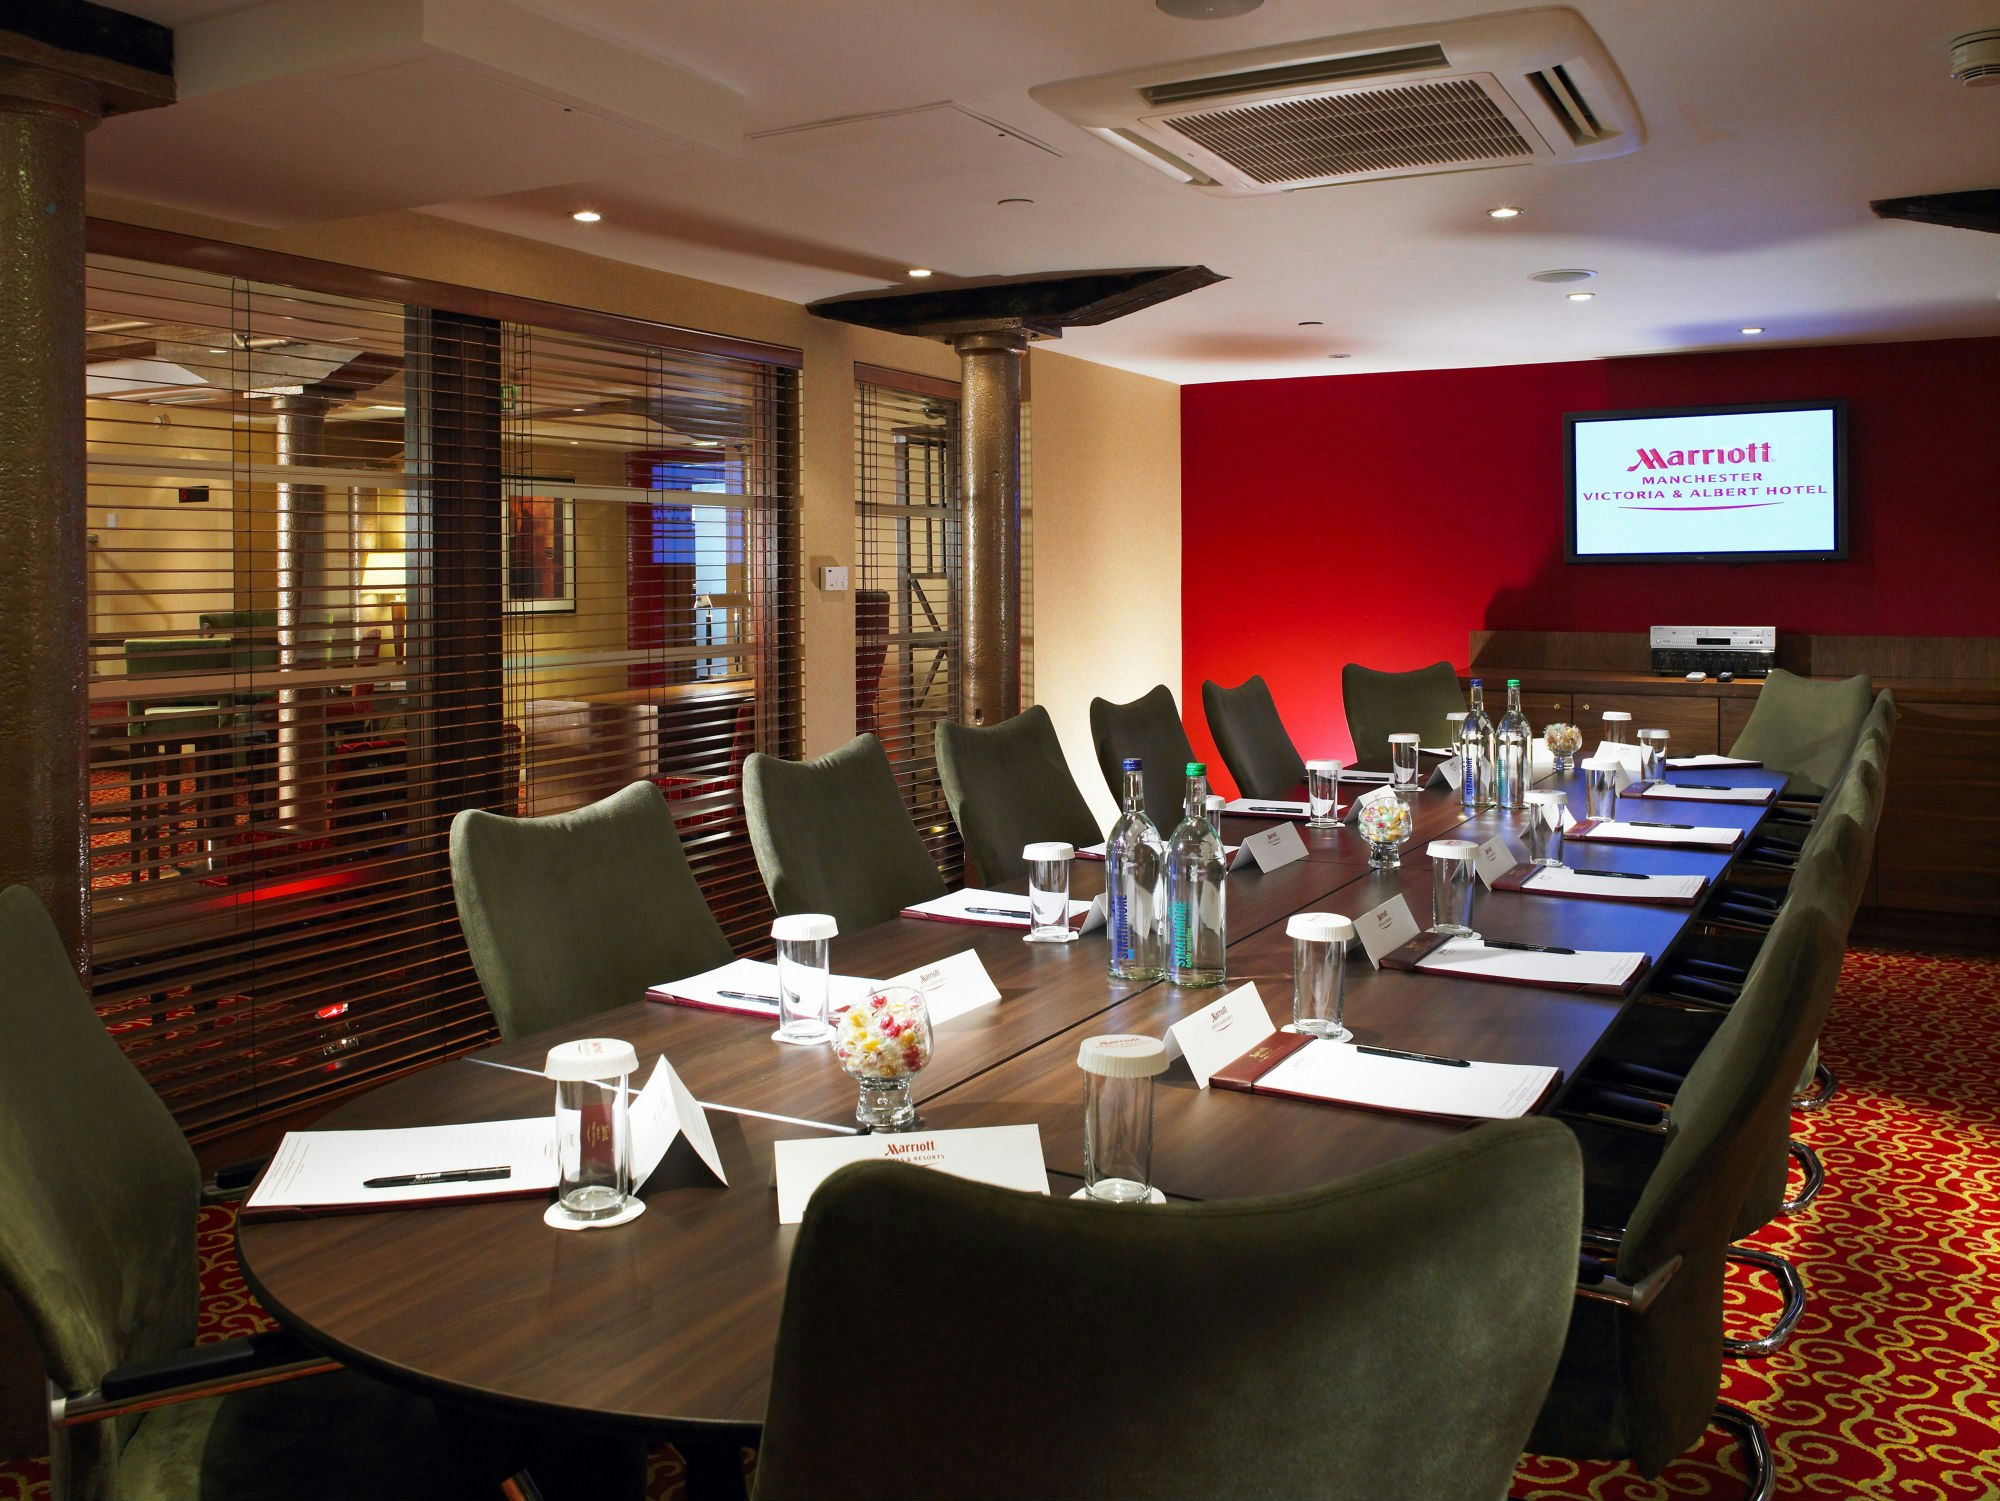 Intimate Private Dining Rooms Venues in Manchester - The Manchester Marriott Victoria & Albert Hotel